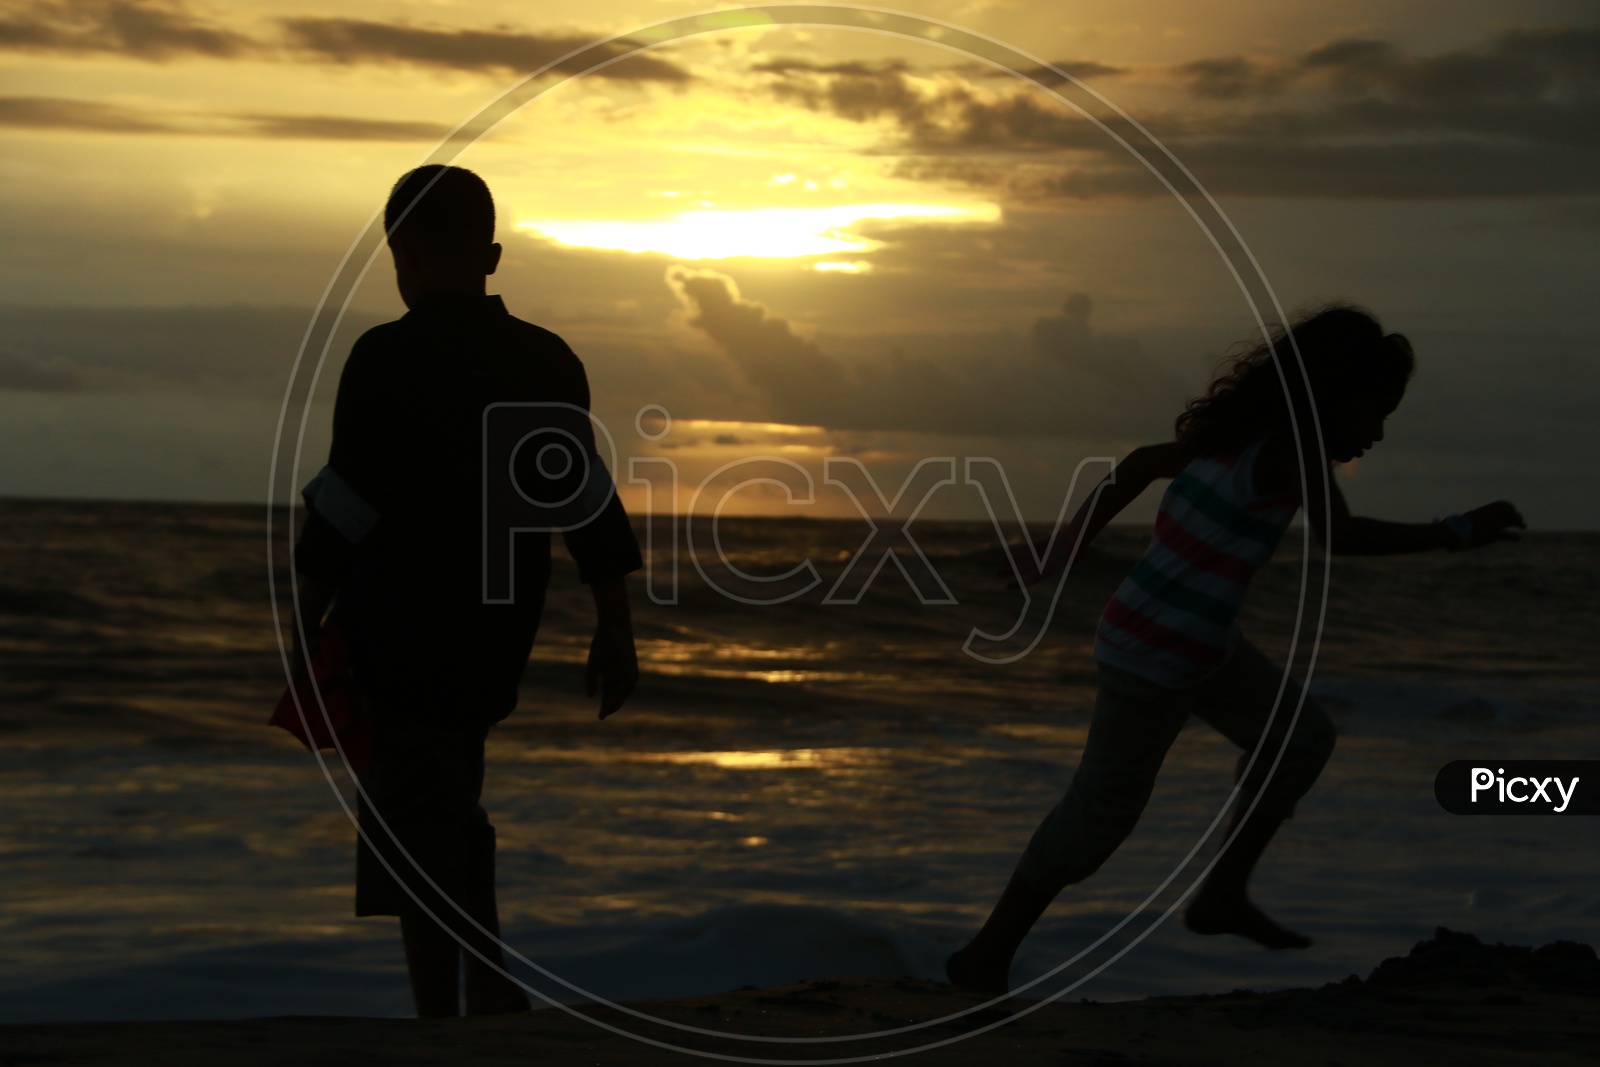 Silhouette Of Father And Daughter In a Beach With Sunset Sky In background